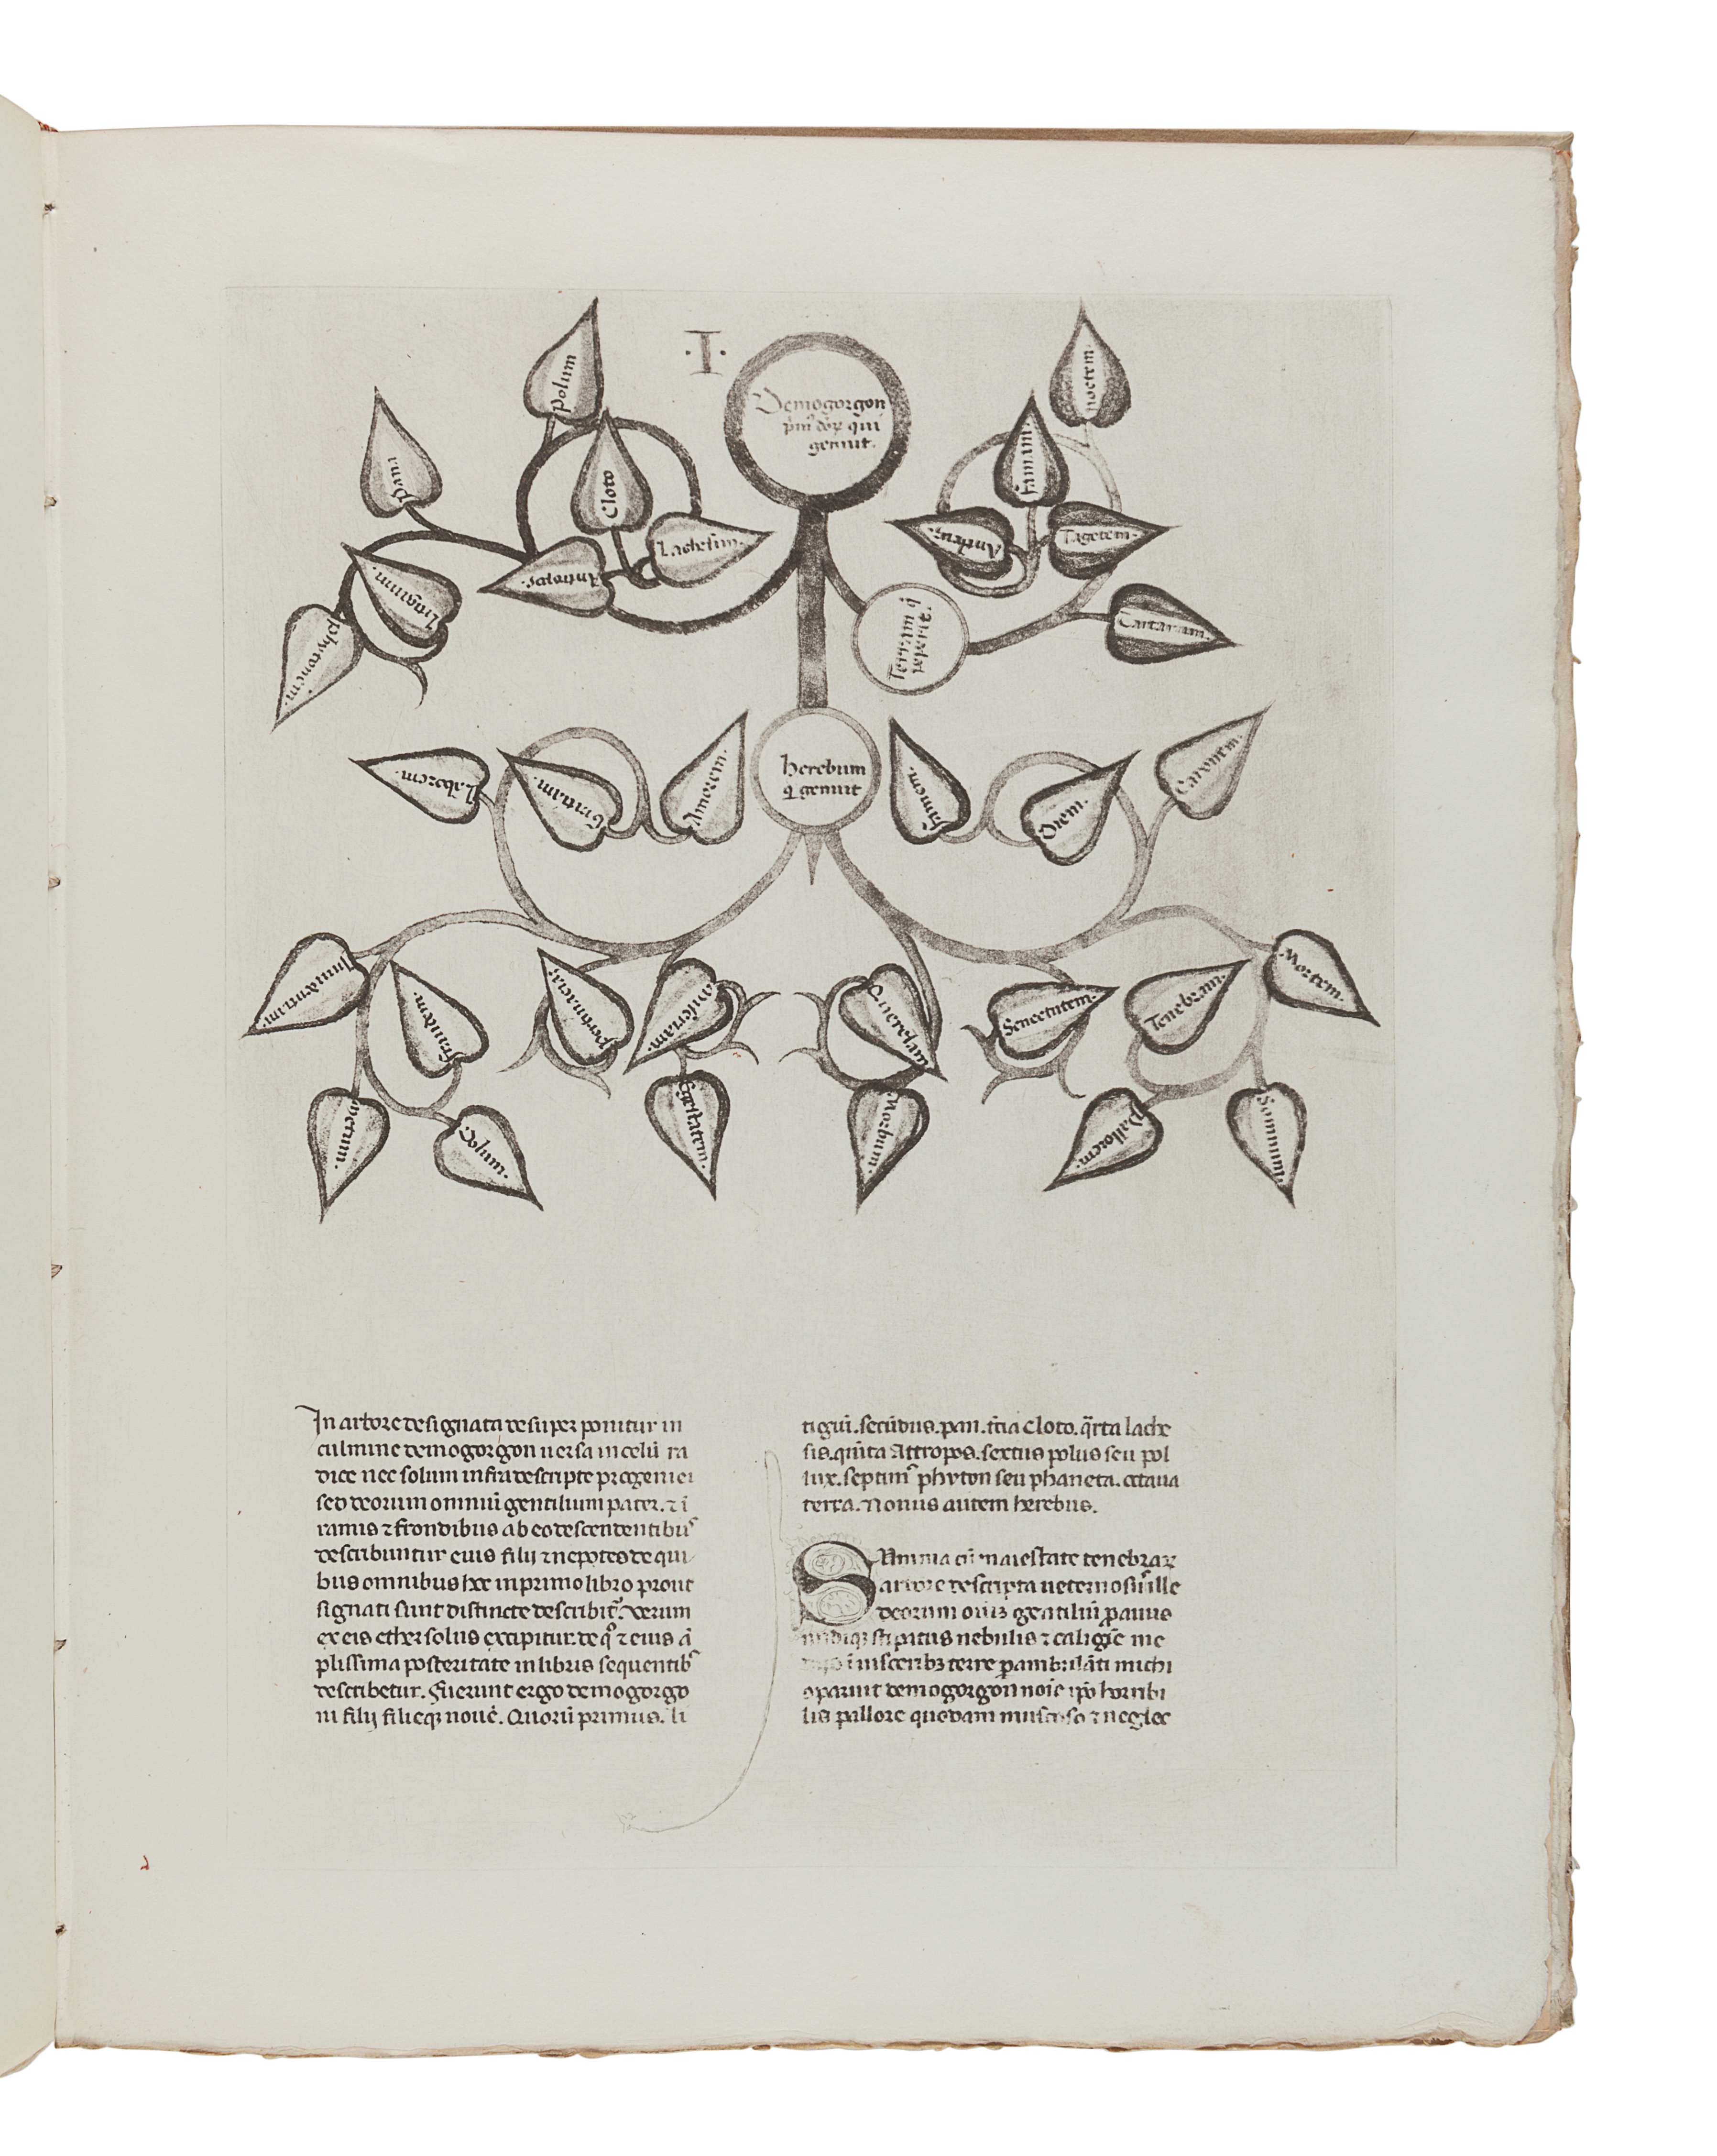 [CAXTON CLUB]. WILKINS, Ernest Hatch. The Trees of the Genealogia Deorum of Boccaccio. Chicago: The